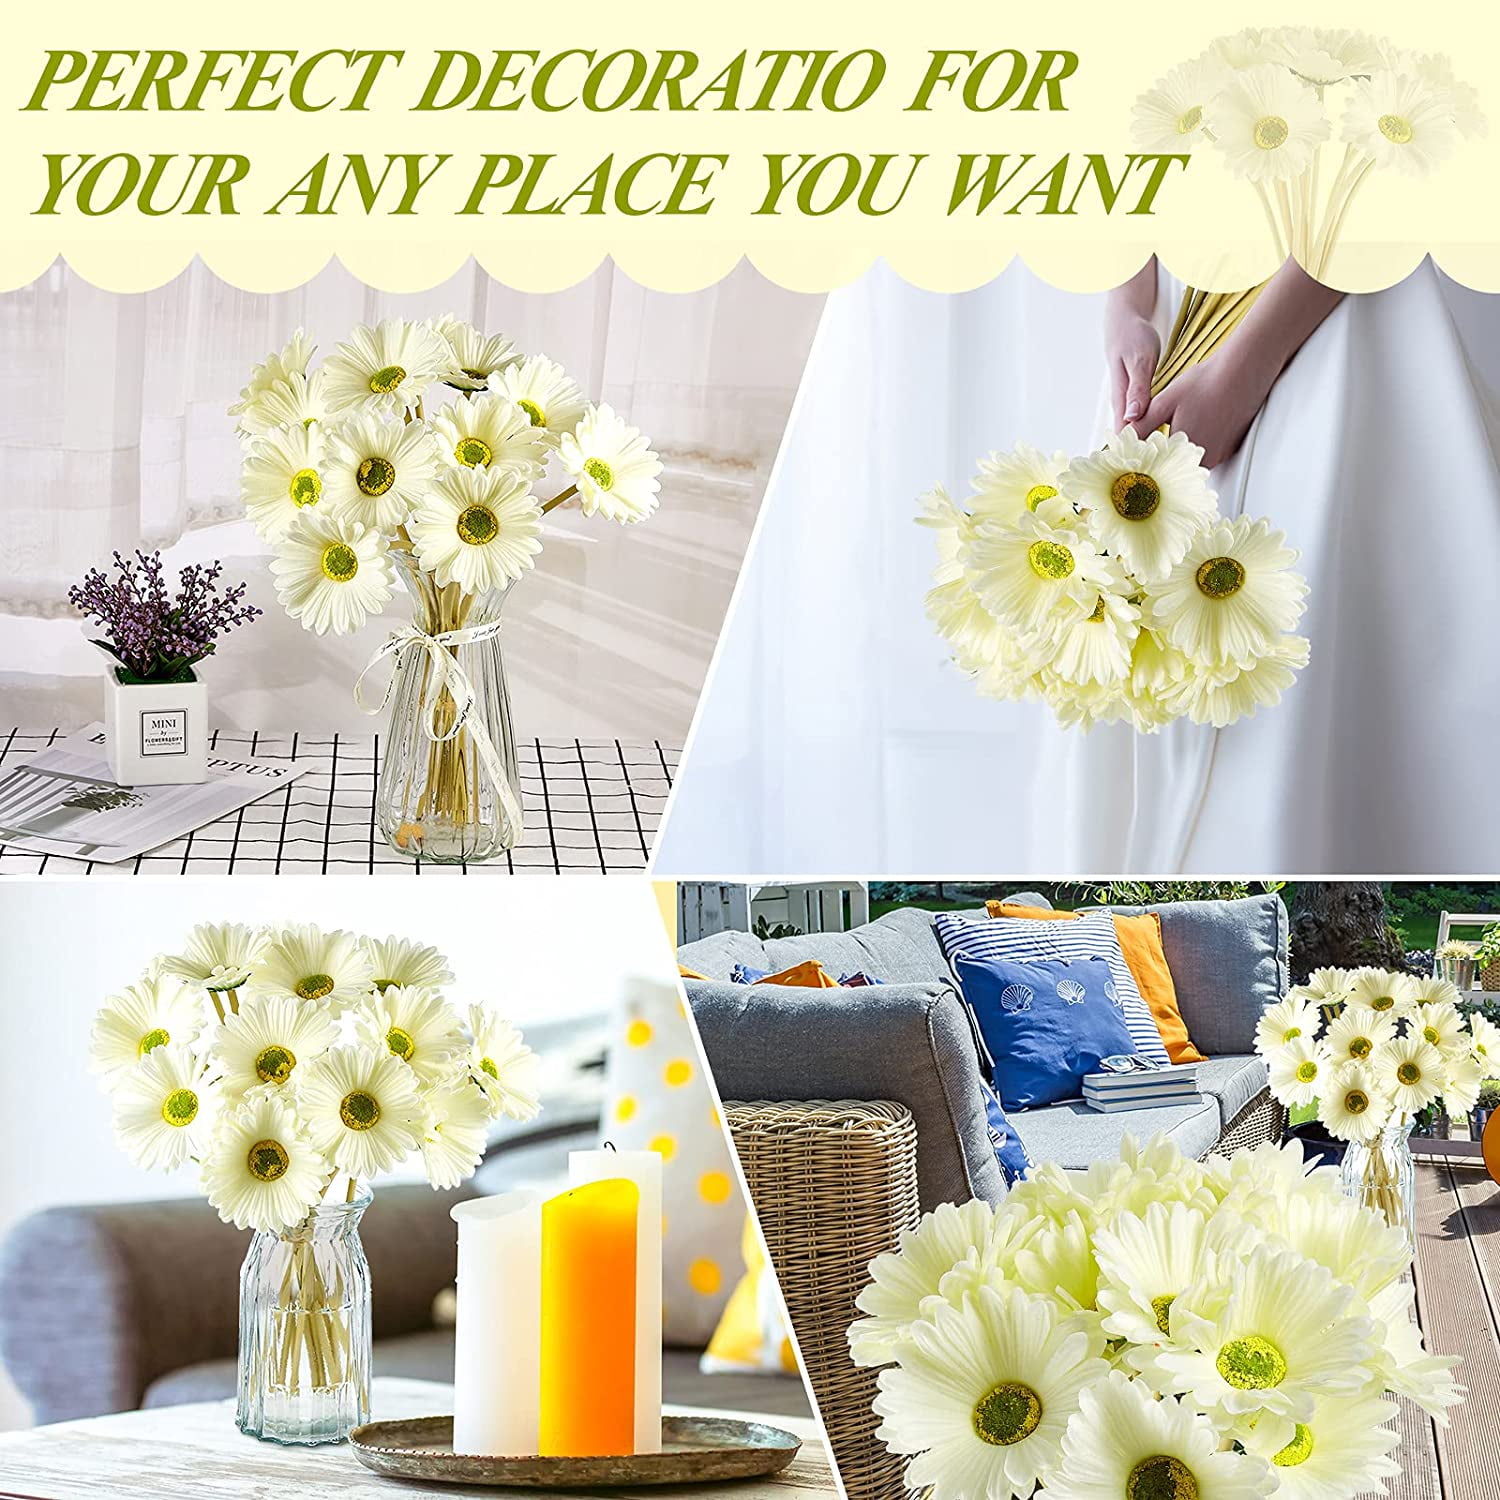 BigOtters Fake Daisy Fake Flowers, 14PCS Faux Gerbera Daisies African Silk  Daisy Flowers Artificial for Wedding Bridal Bouquet Party Home Kitchen